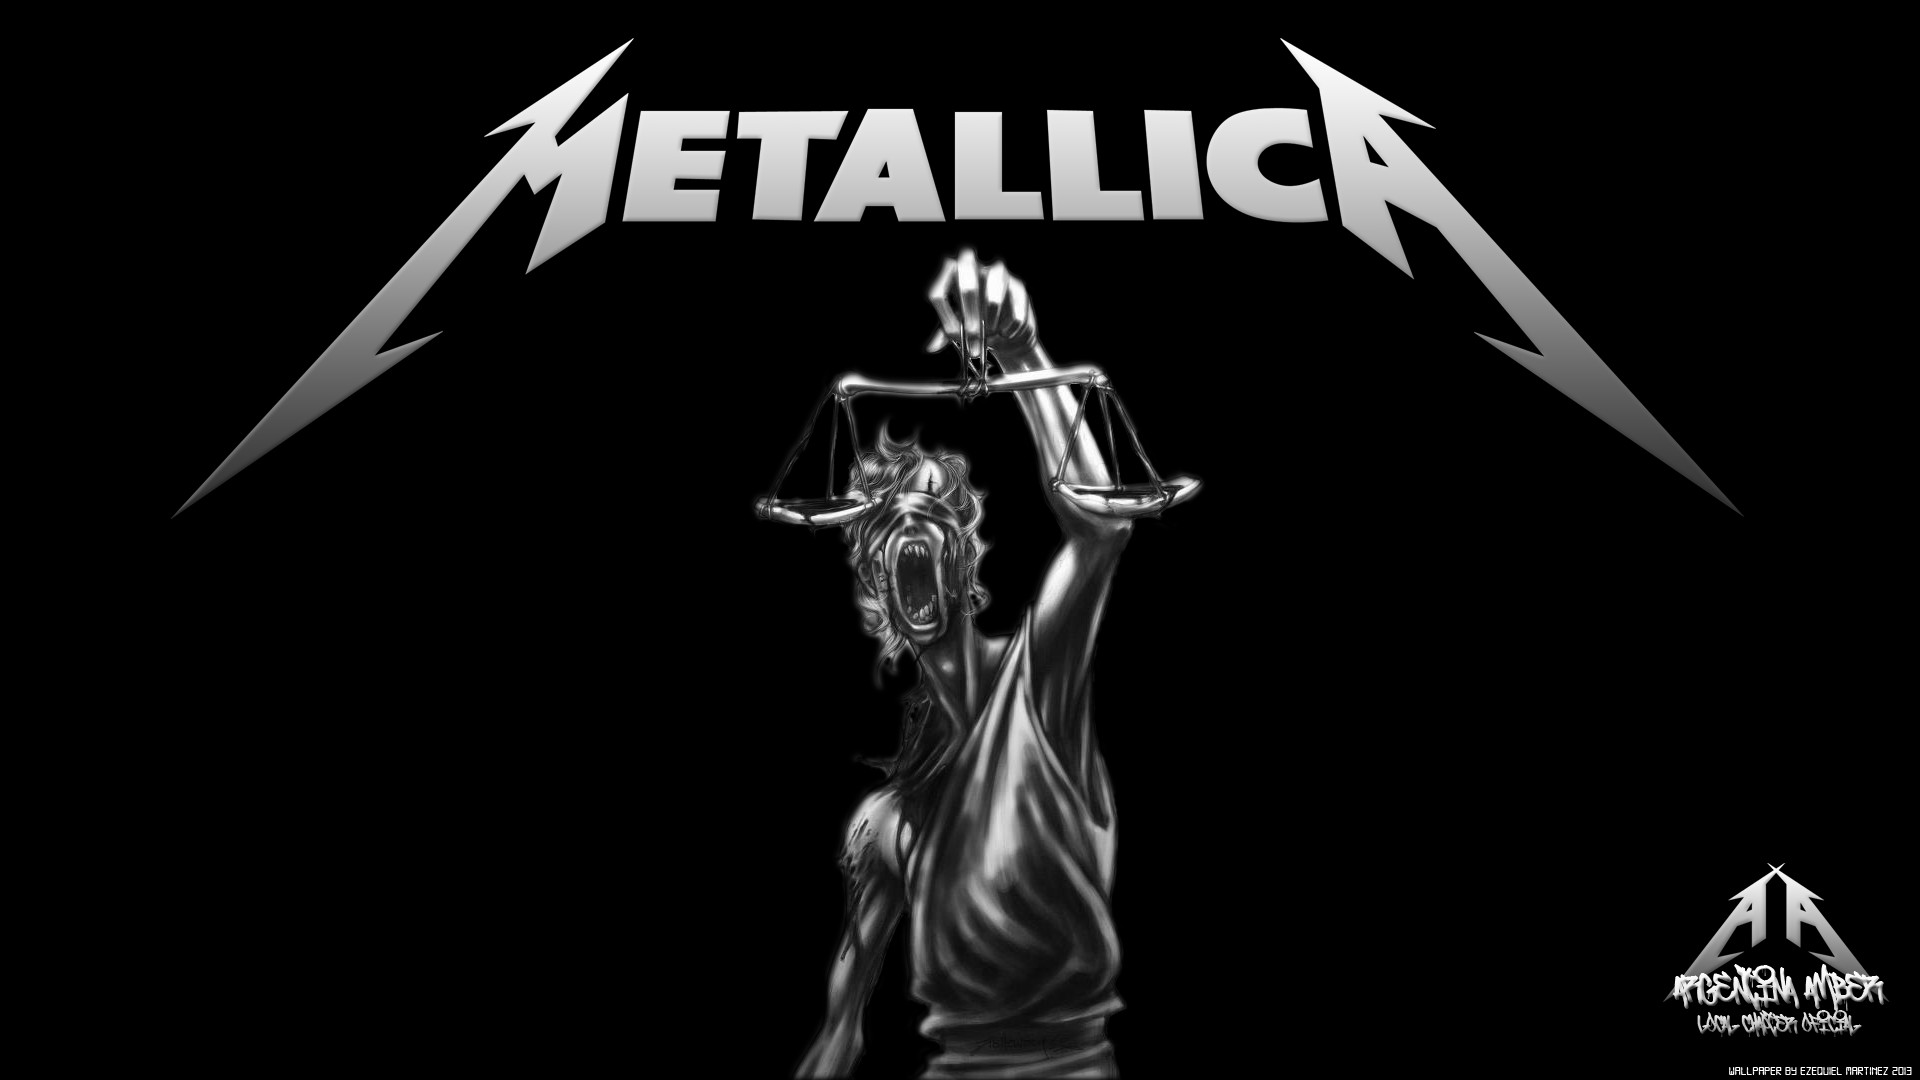 1920x1080 Metallica And Justice For All Wallpapers Widescreen For Desktop Wallpaper  1920 x 1080 px 623.08 KB